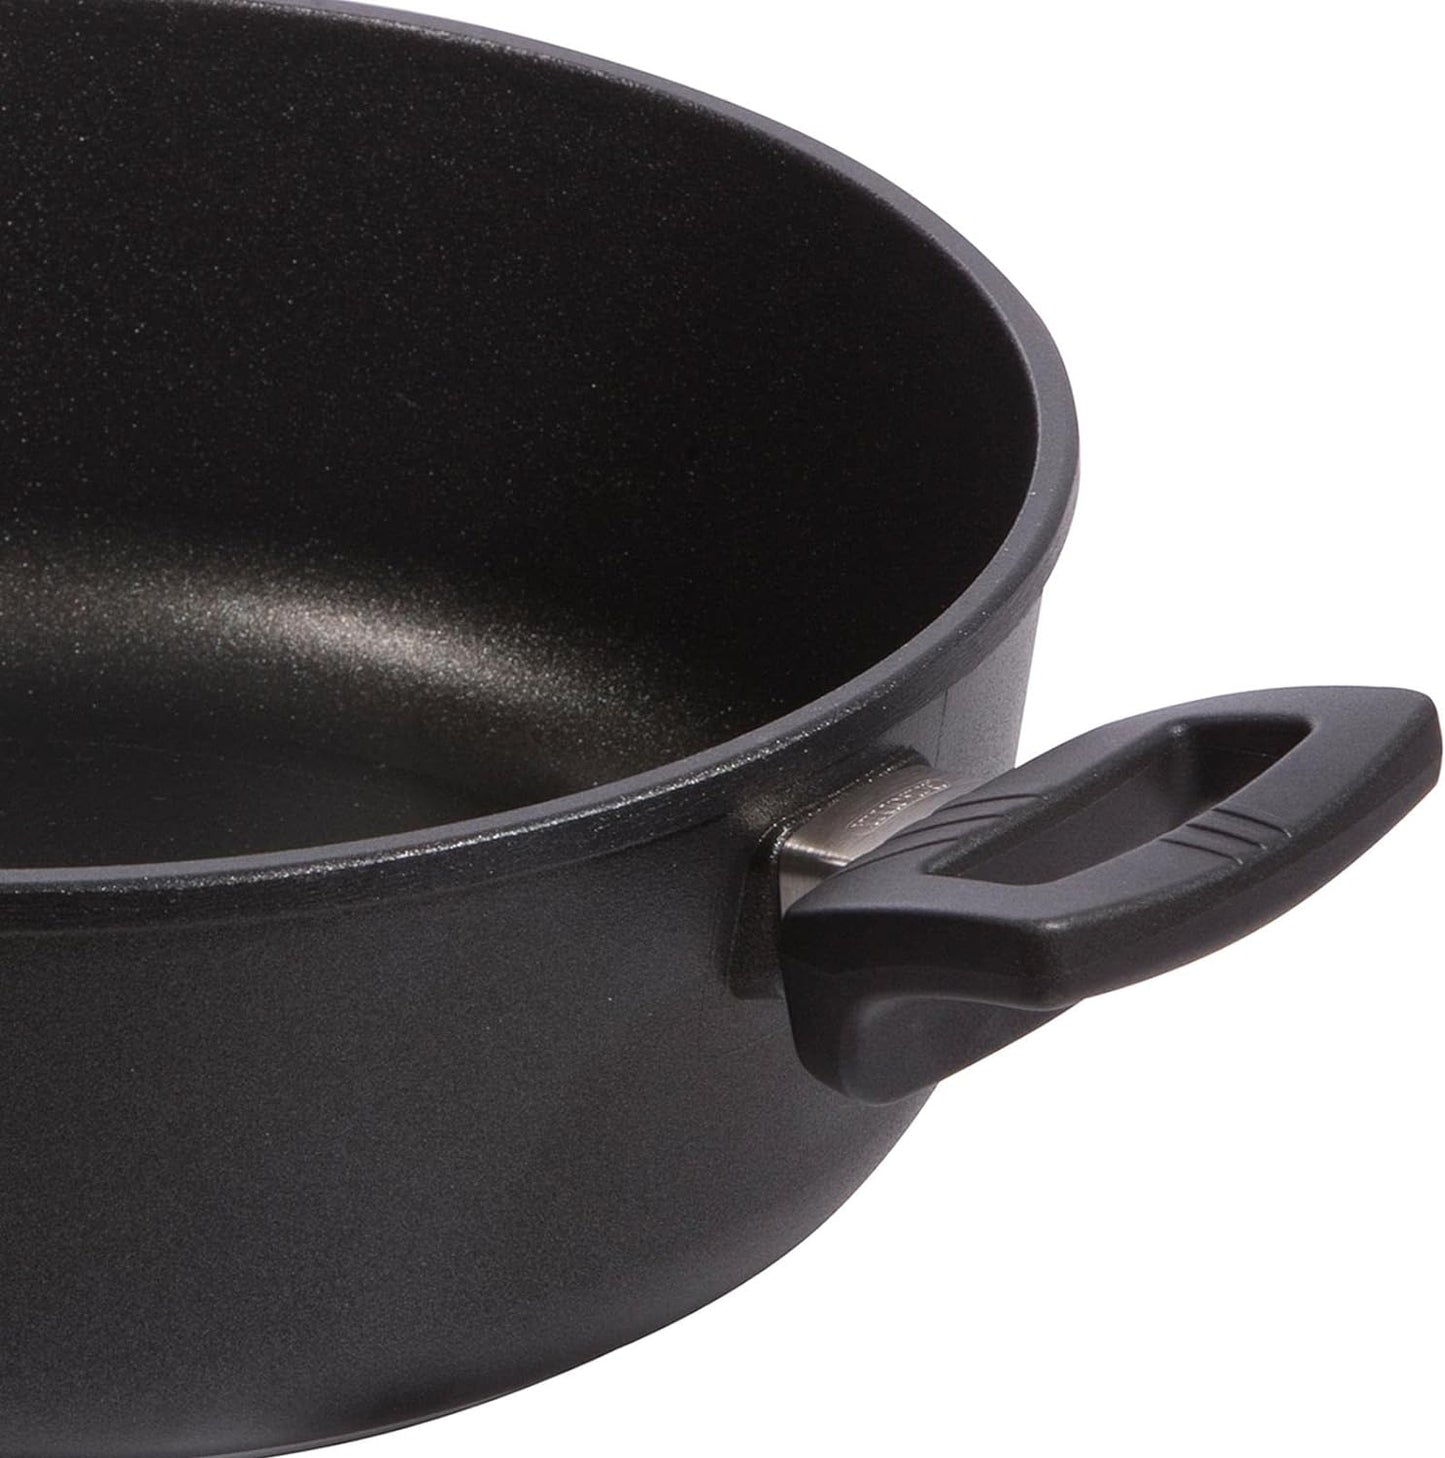 Eurolux premium stewing pan, Ø 24, 26, 28, & 32 cm, 10 cm high, with 2 fixed handles, Induction friendly, Made in Germany